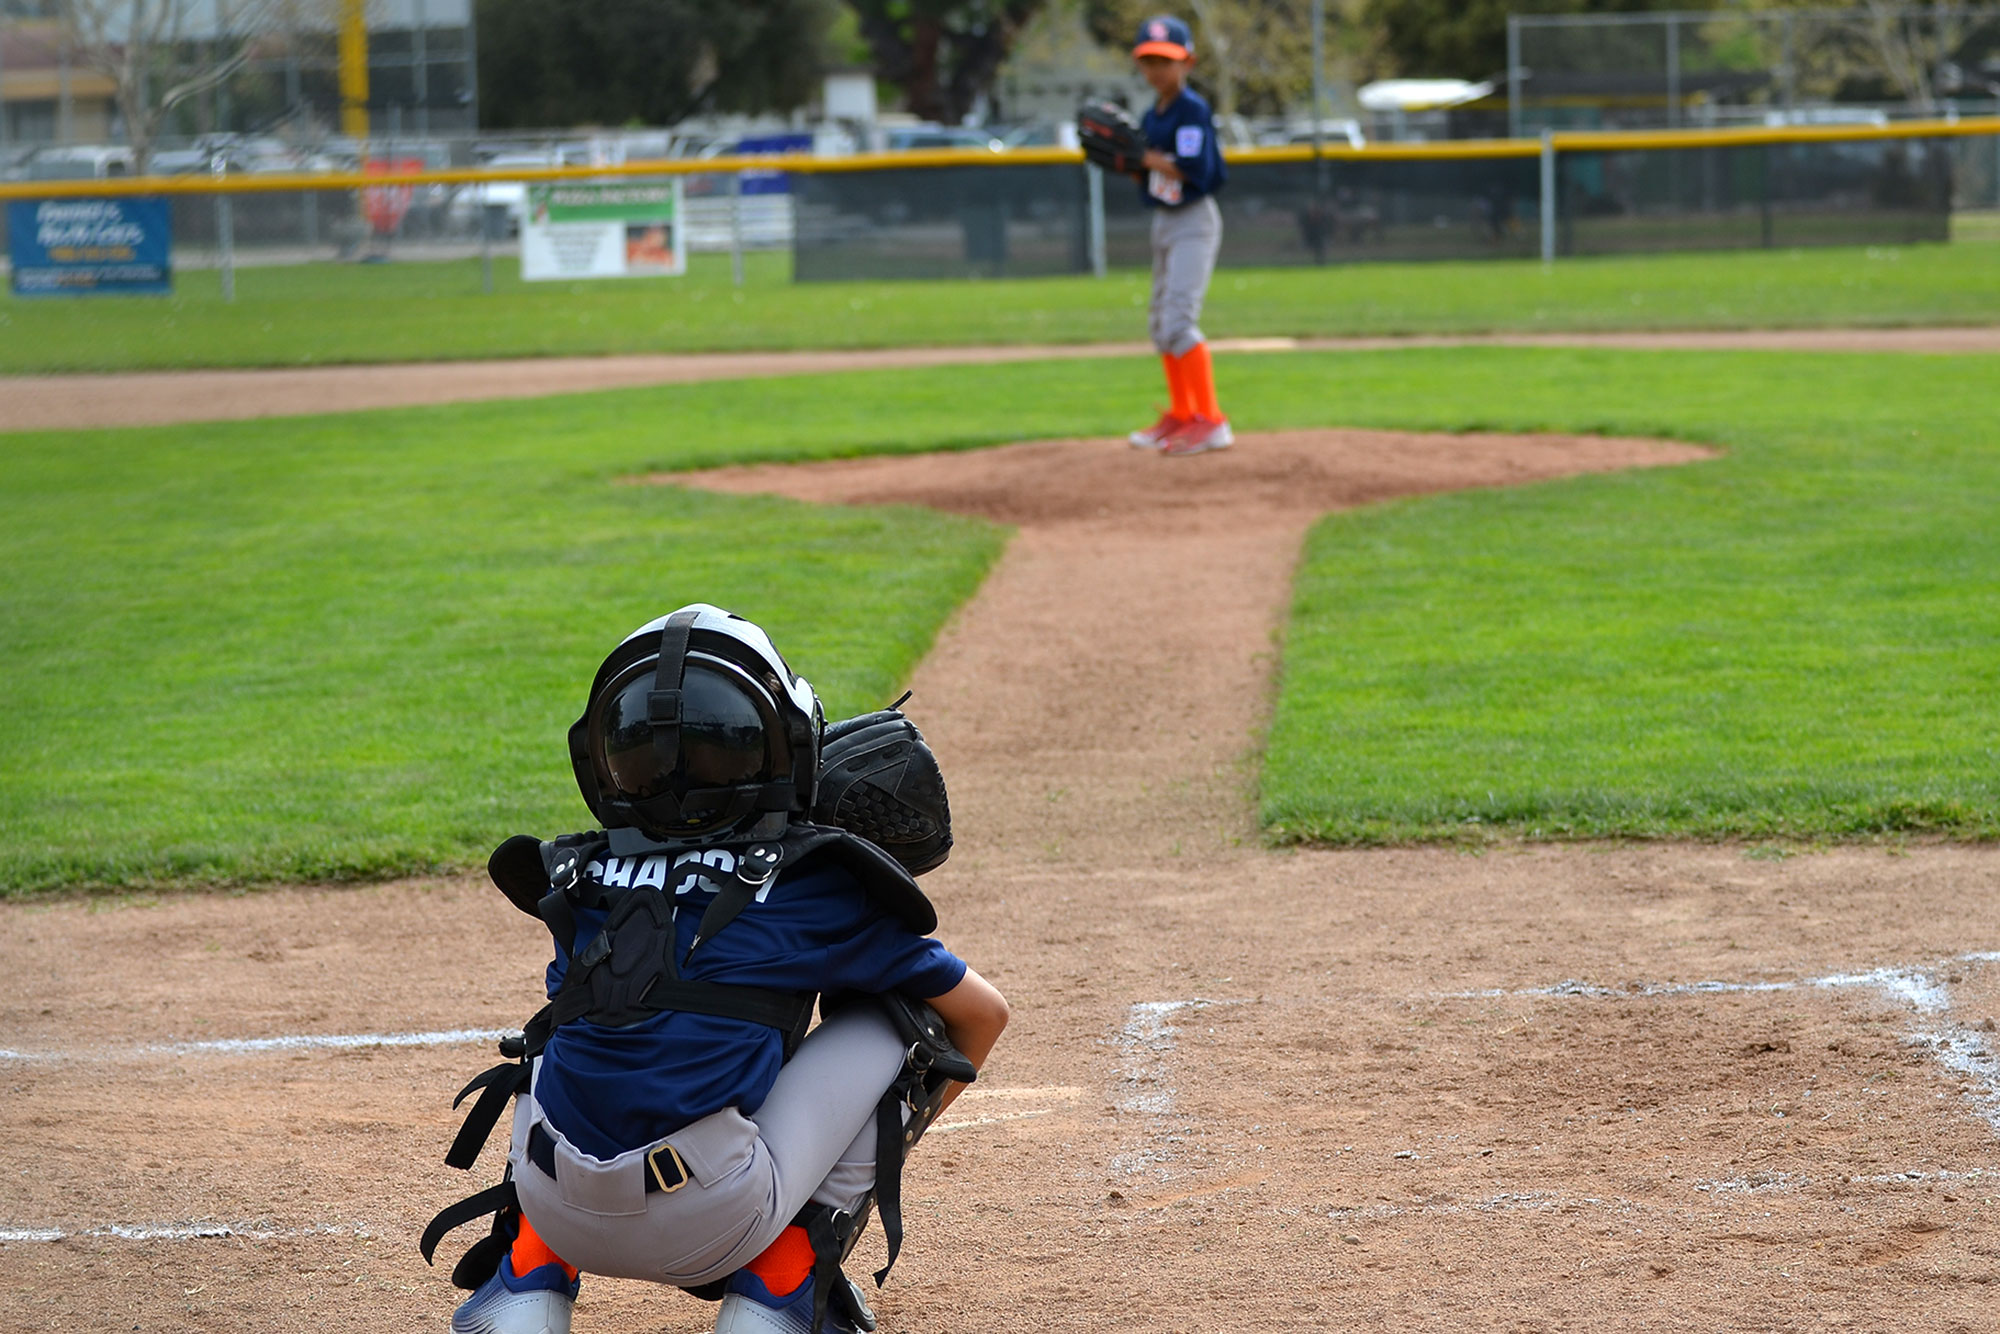 You Make the Call – Manager Coach Warming Up Little League